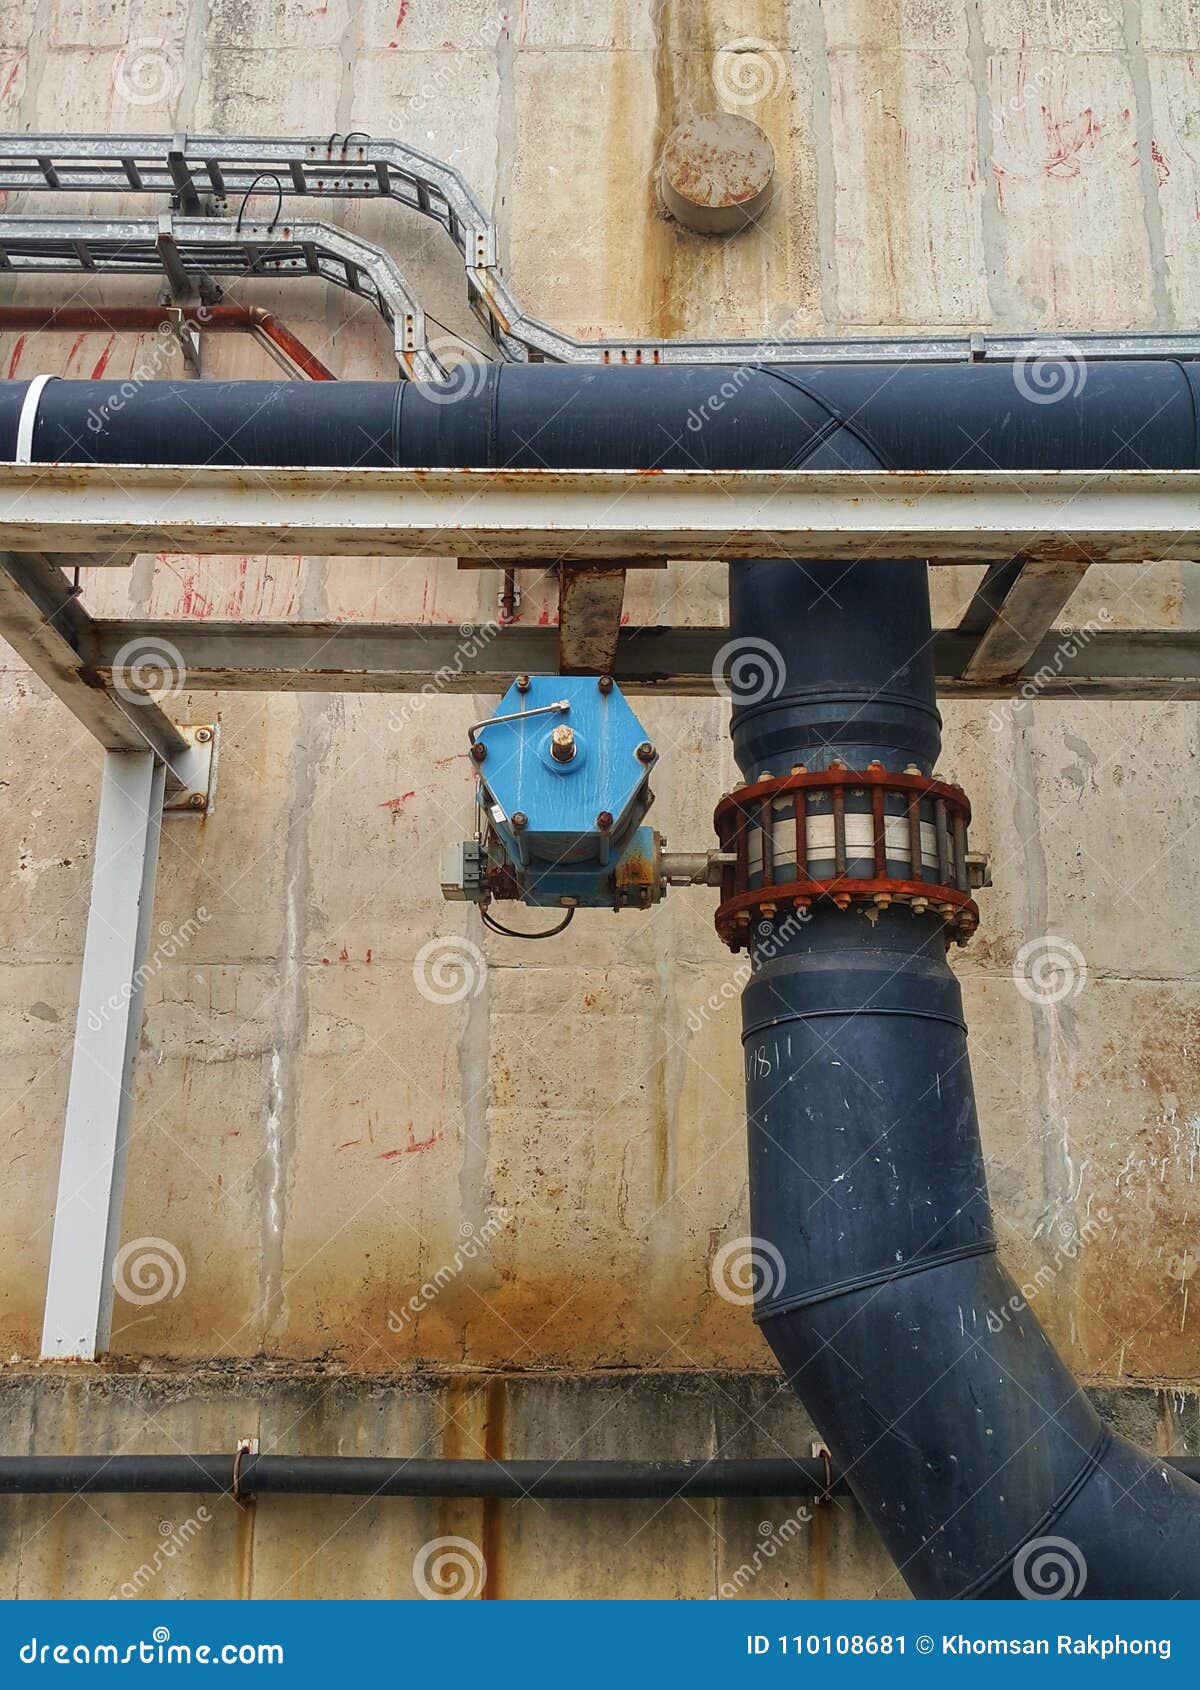 HDPE Pipe Connection and Control Valve Stock Image - Image of flow